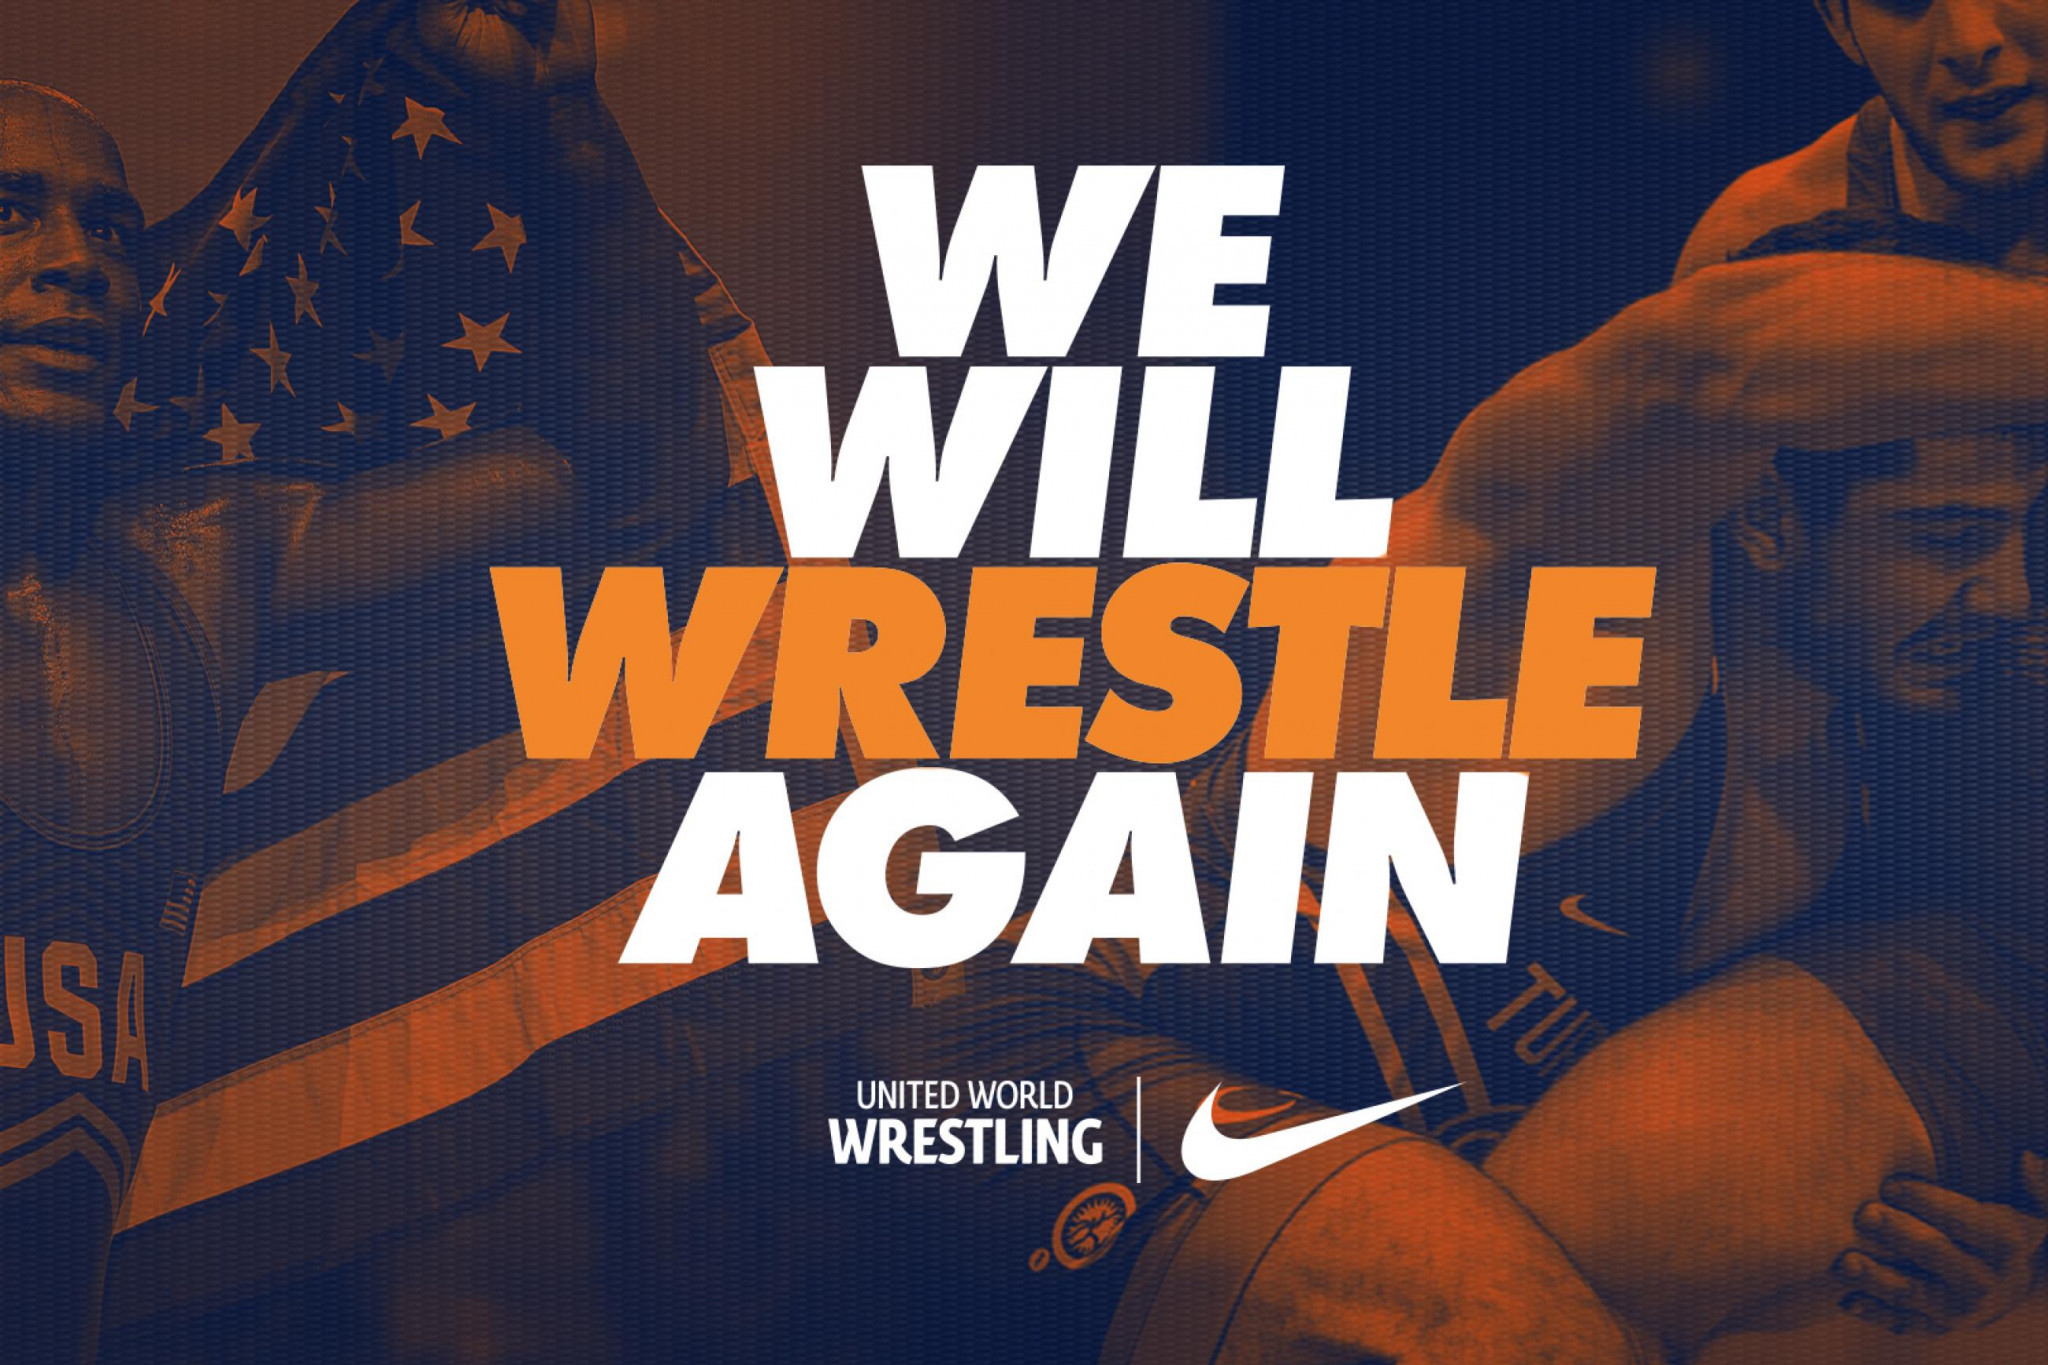 United World Wrestling partners with Nike for recovery campaign